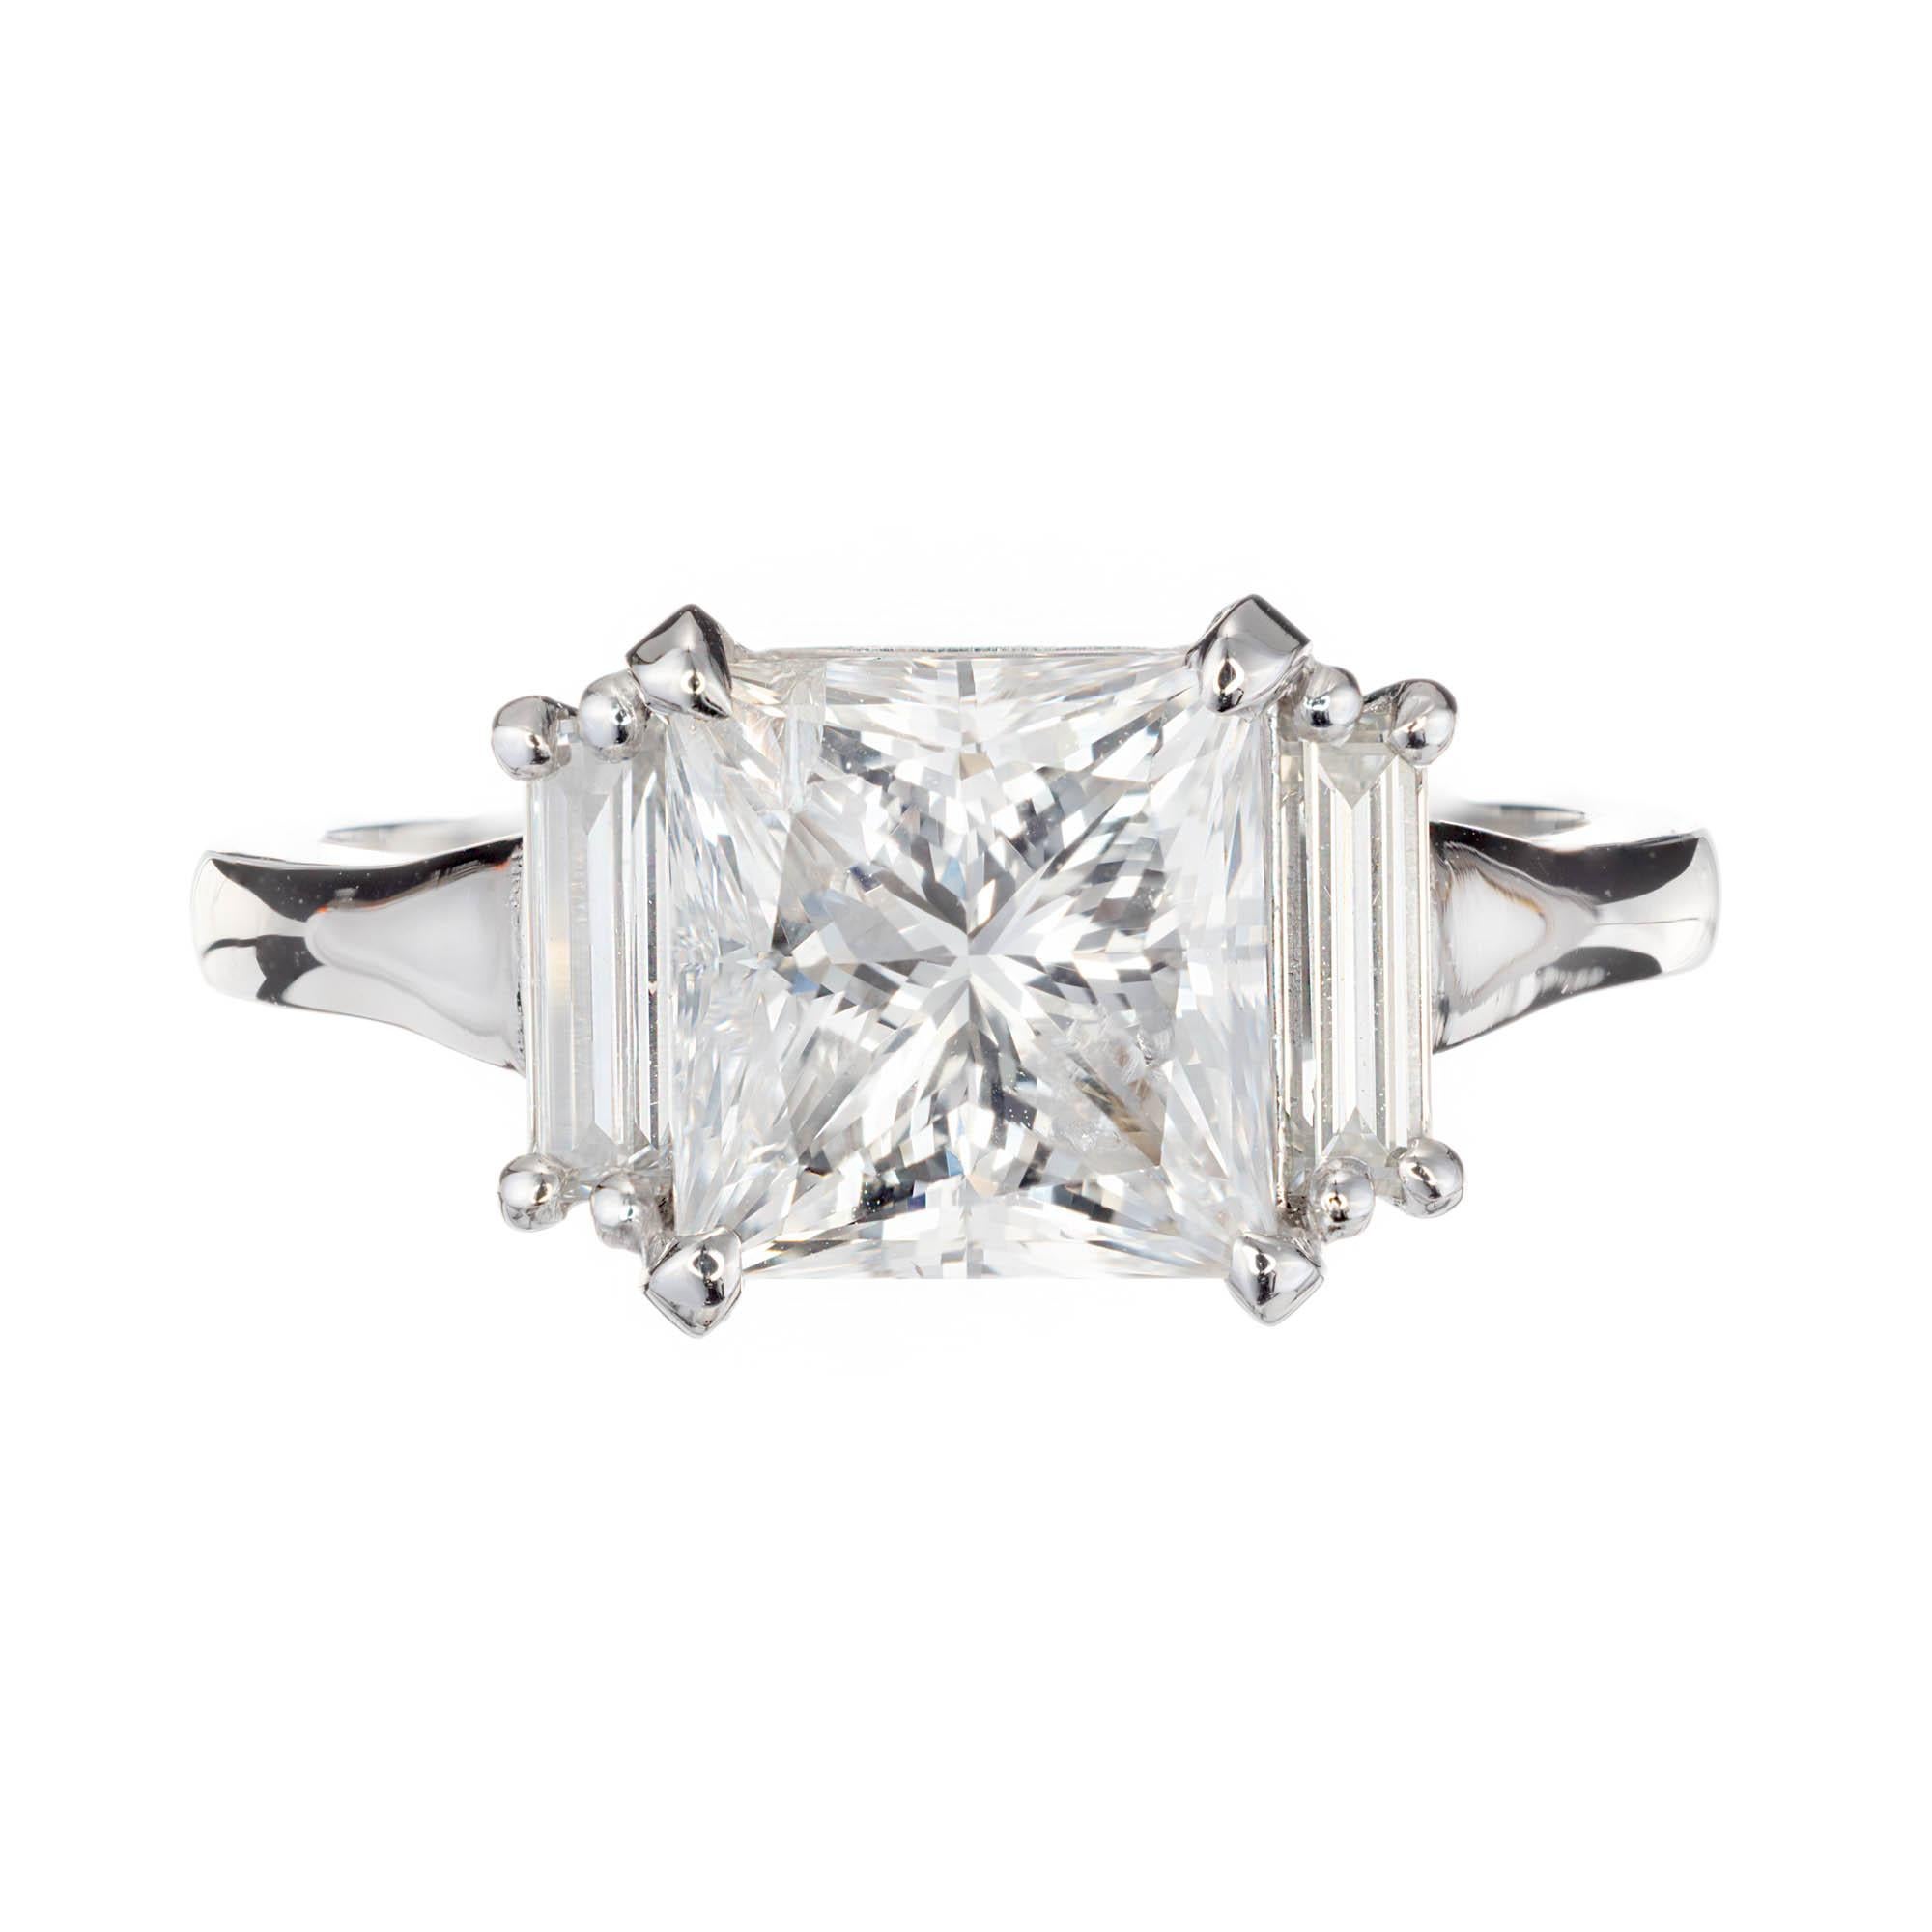 Peter Suchy princess cut three-stone diamond engagement ring. Gia certified square center diamond accented with 2 baguette diamonds in a platinum setting.  

1 square brilliant H I diamond, Approximate 3.05 carats. GIA Certificate # 6197412152
2